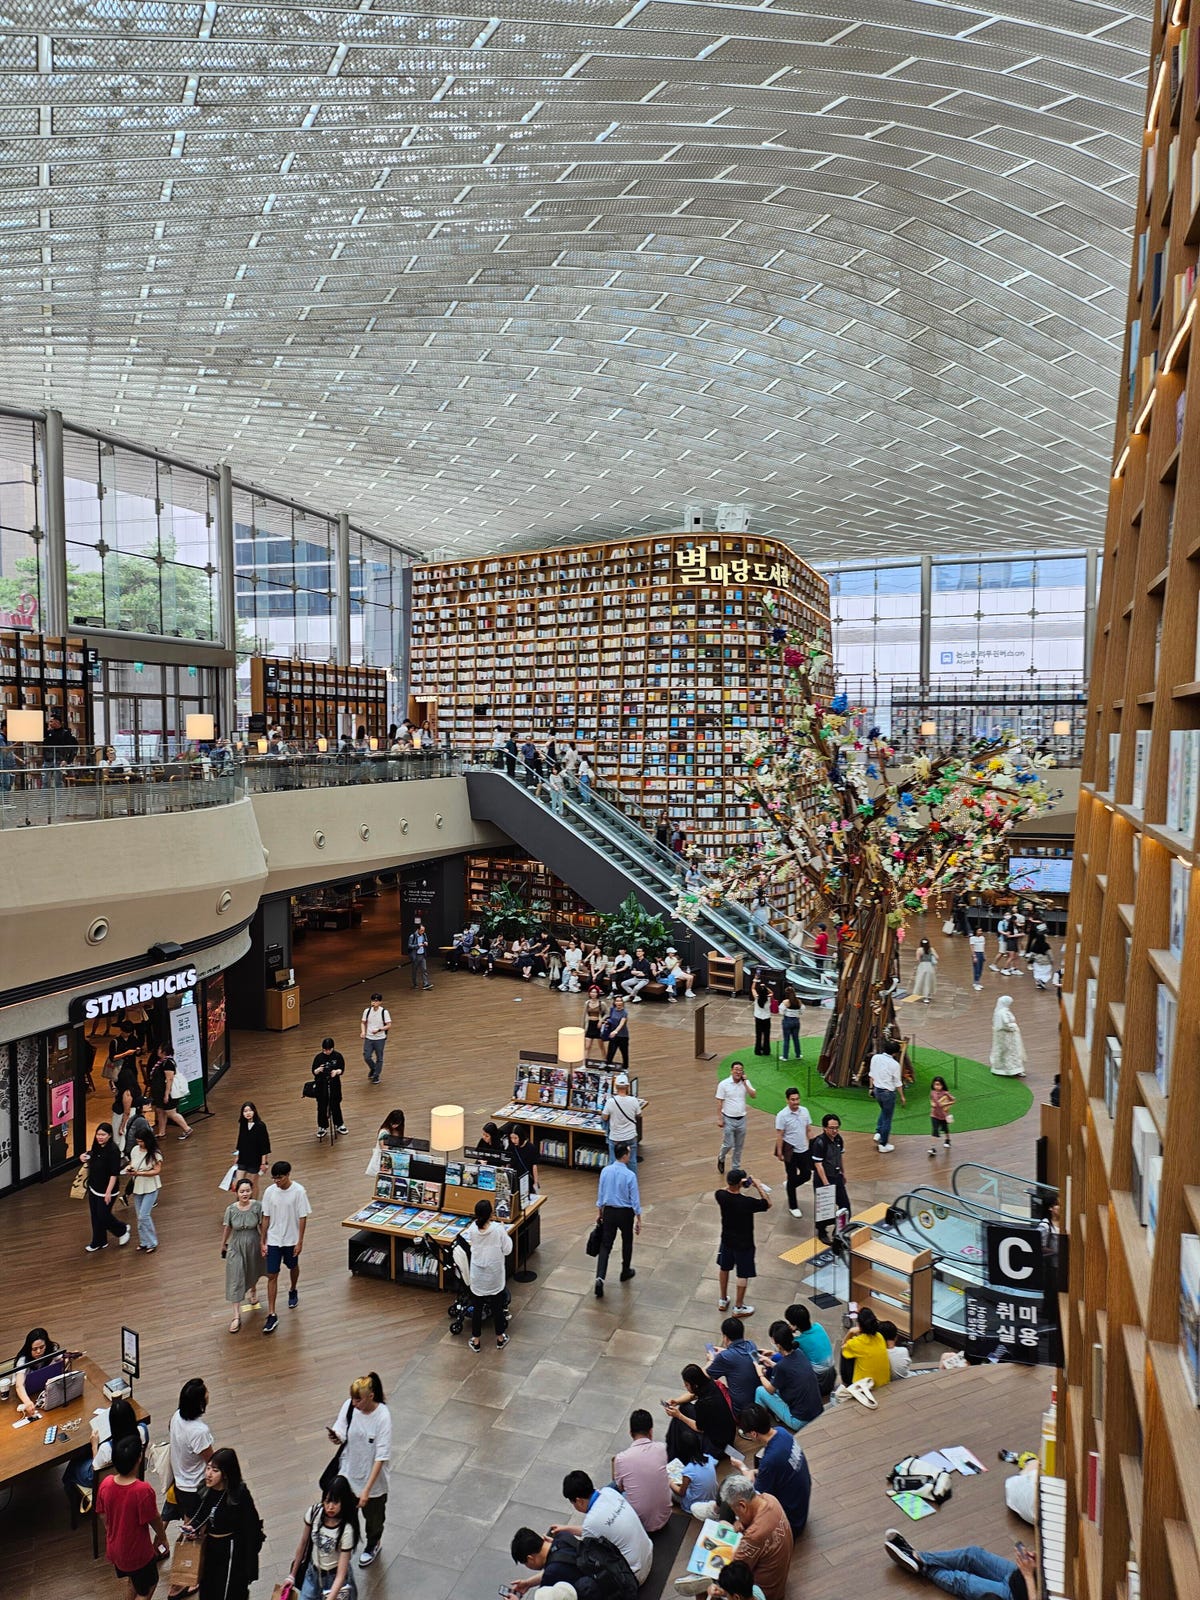 A photo of the Starfield Library in the Coex Center's Starfield Mall.